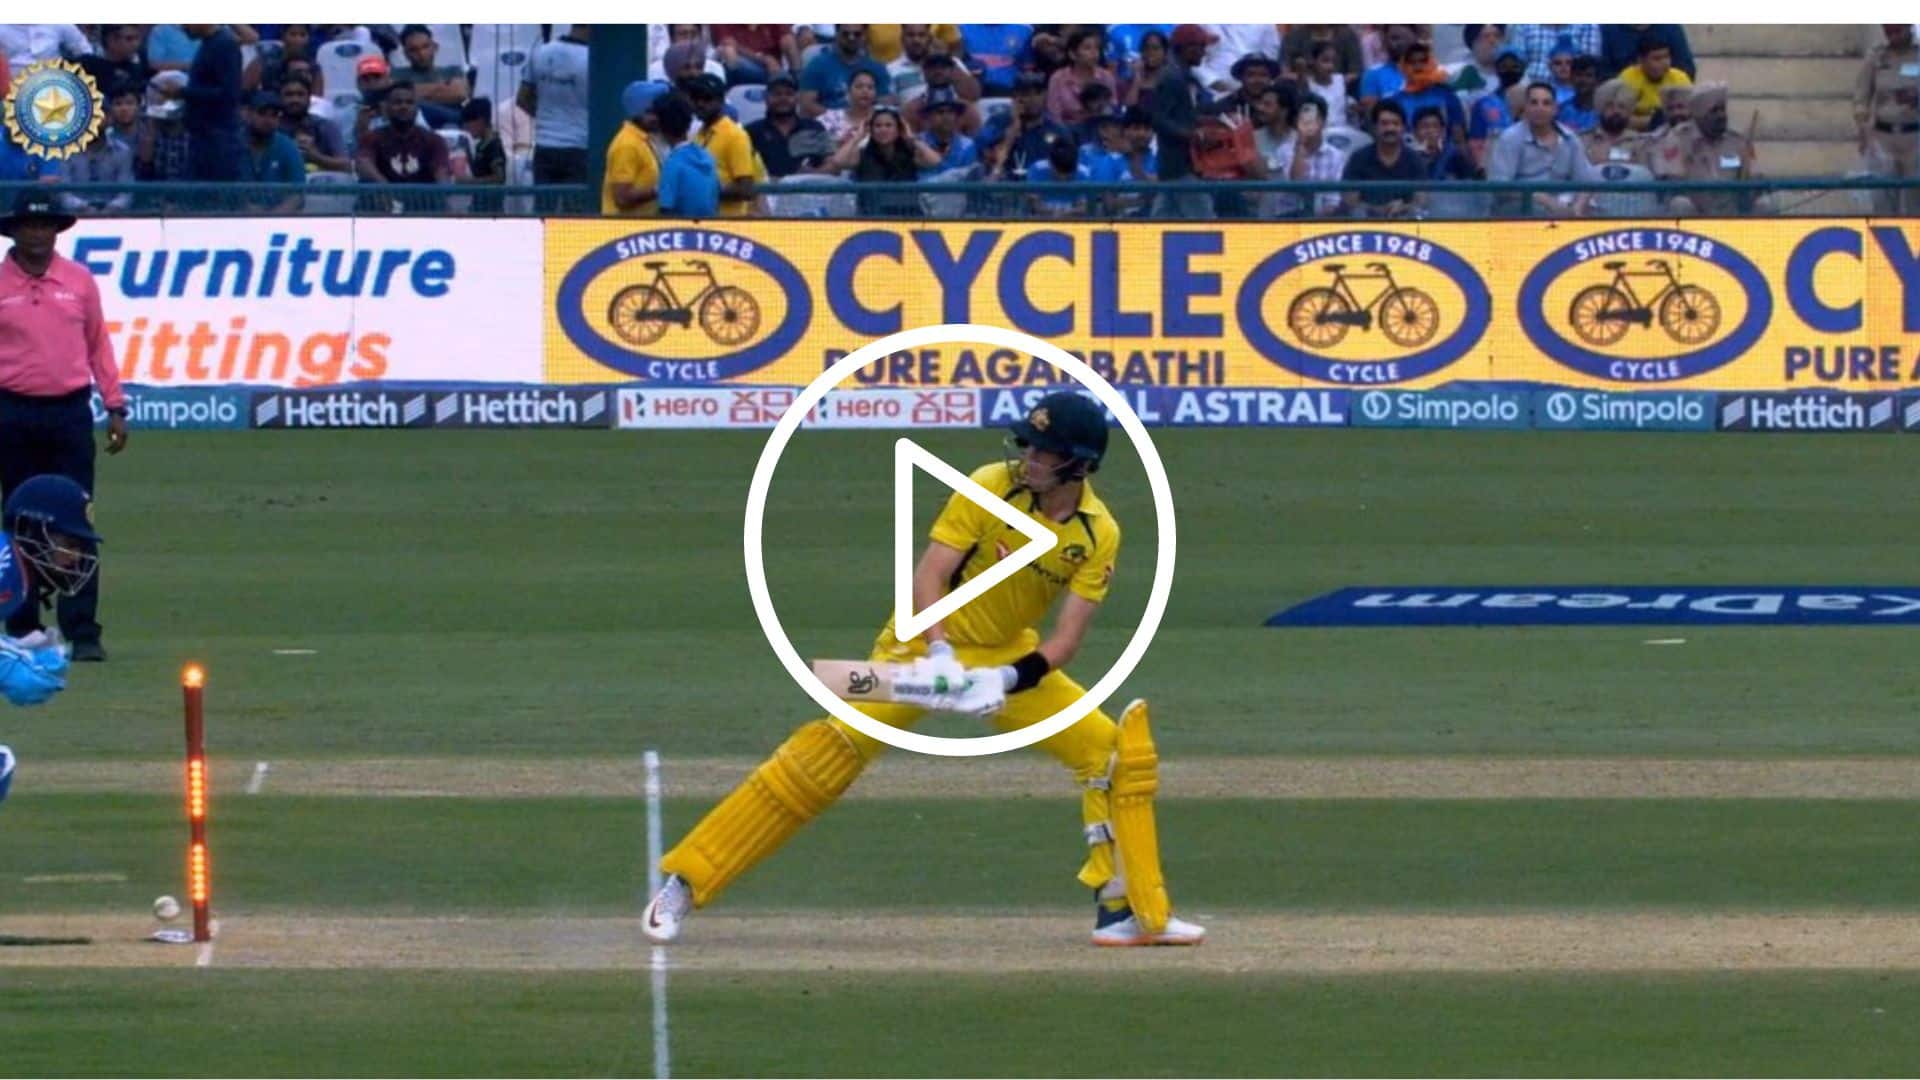 [Watch] KL Rahul Pulls Off An Dhoni-Esque Stumping Mistakenly As Ashwin Gets Labuschagne